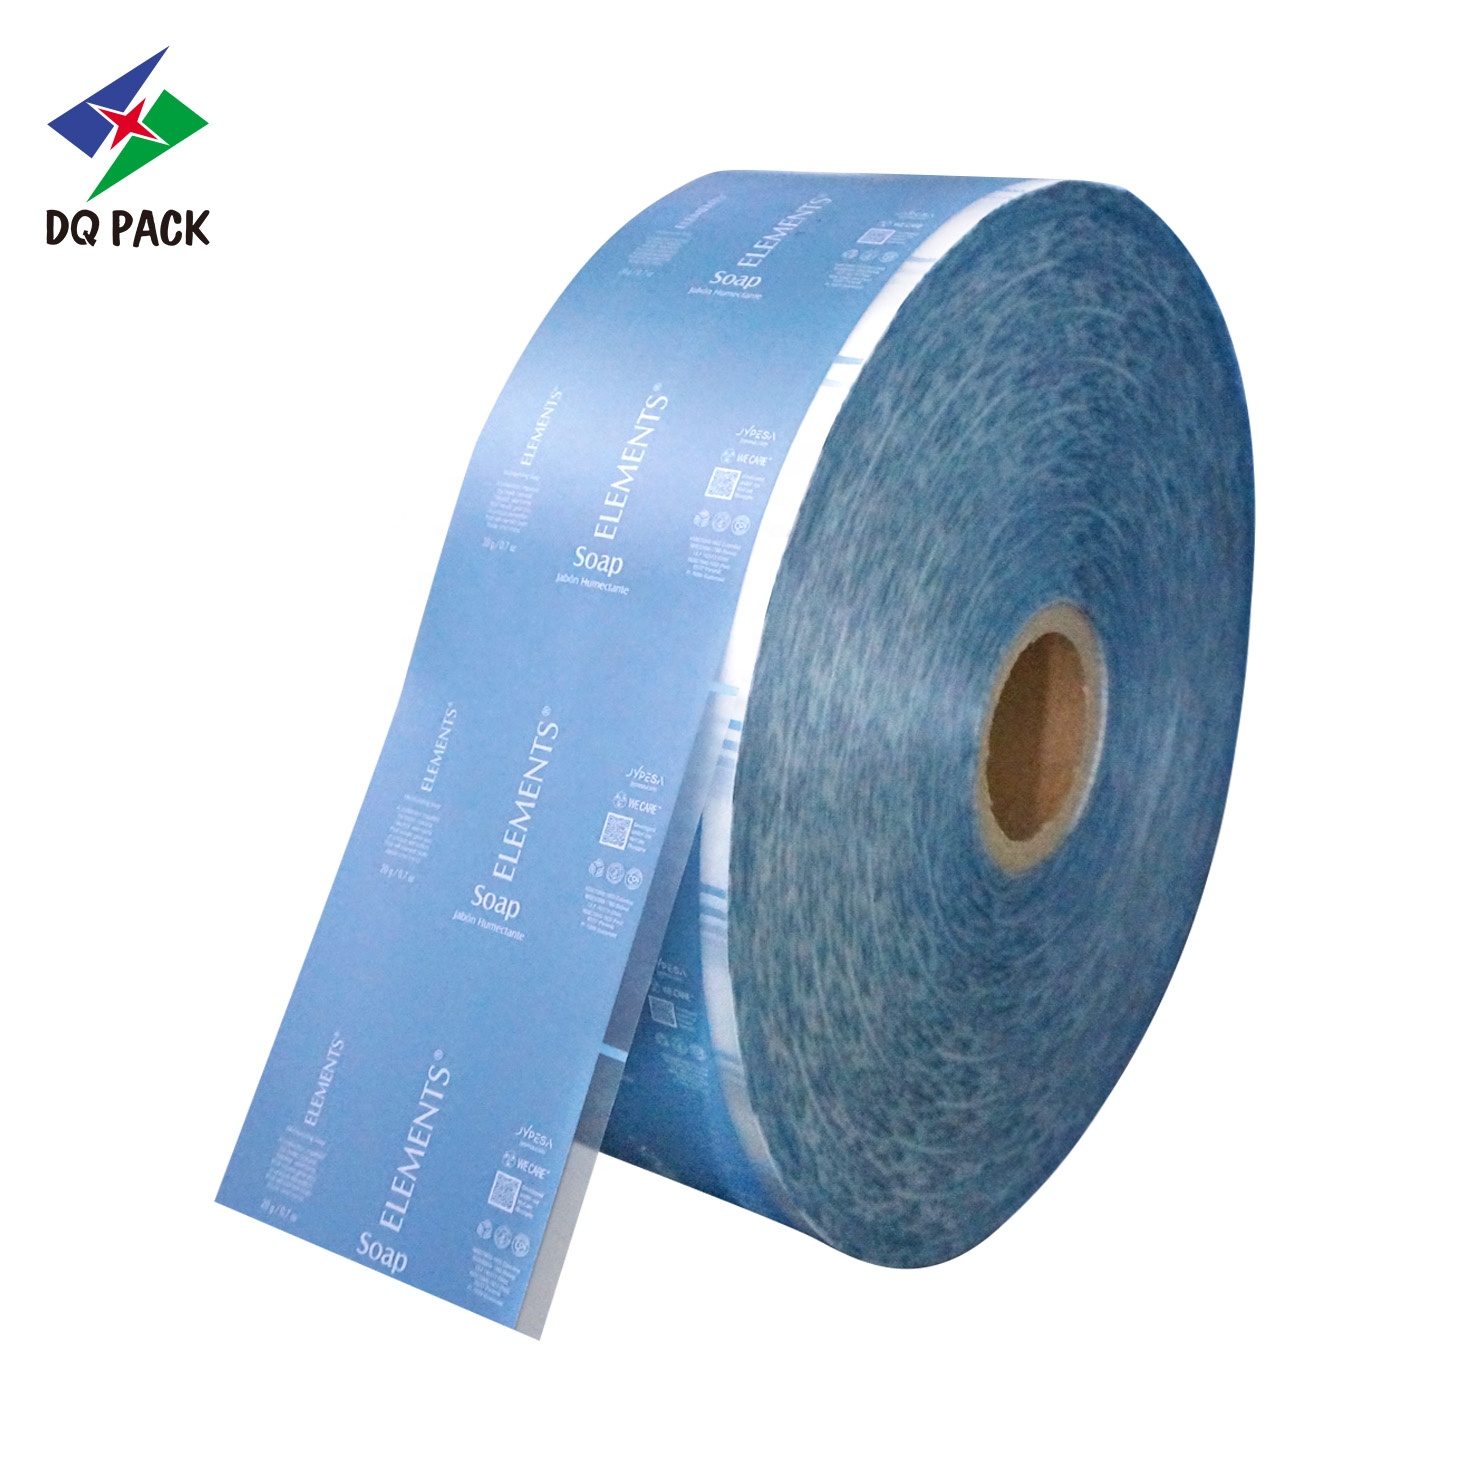 DQ PACK China Supplier Liquid Clean Soap Shampoo Roll Stock Film Packaging Roll Film